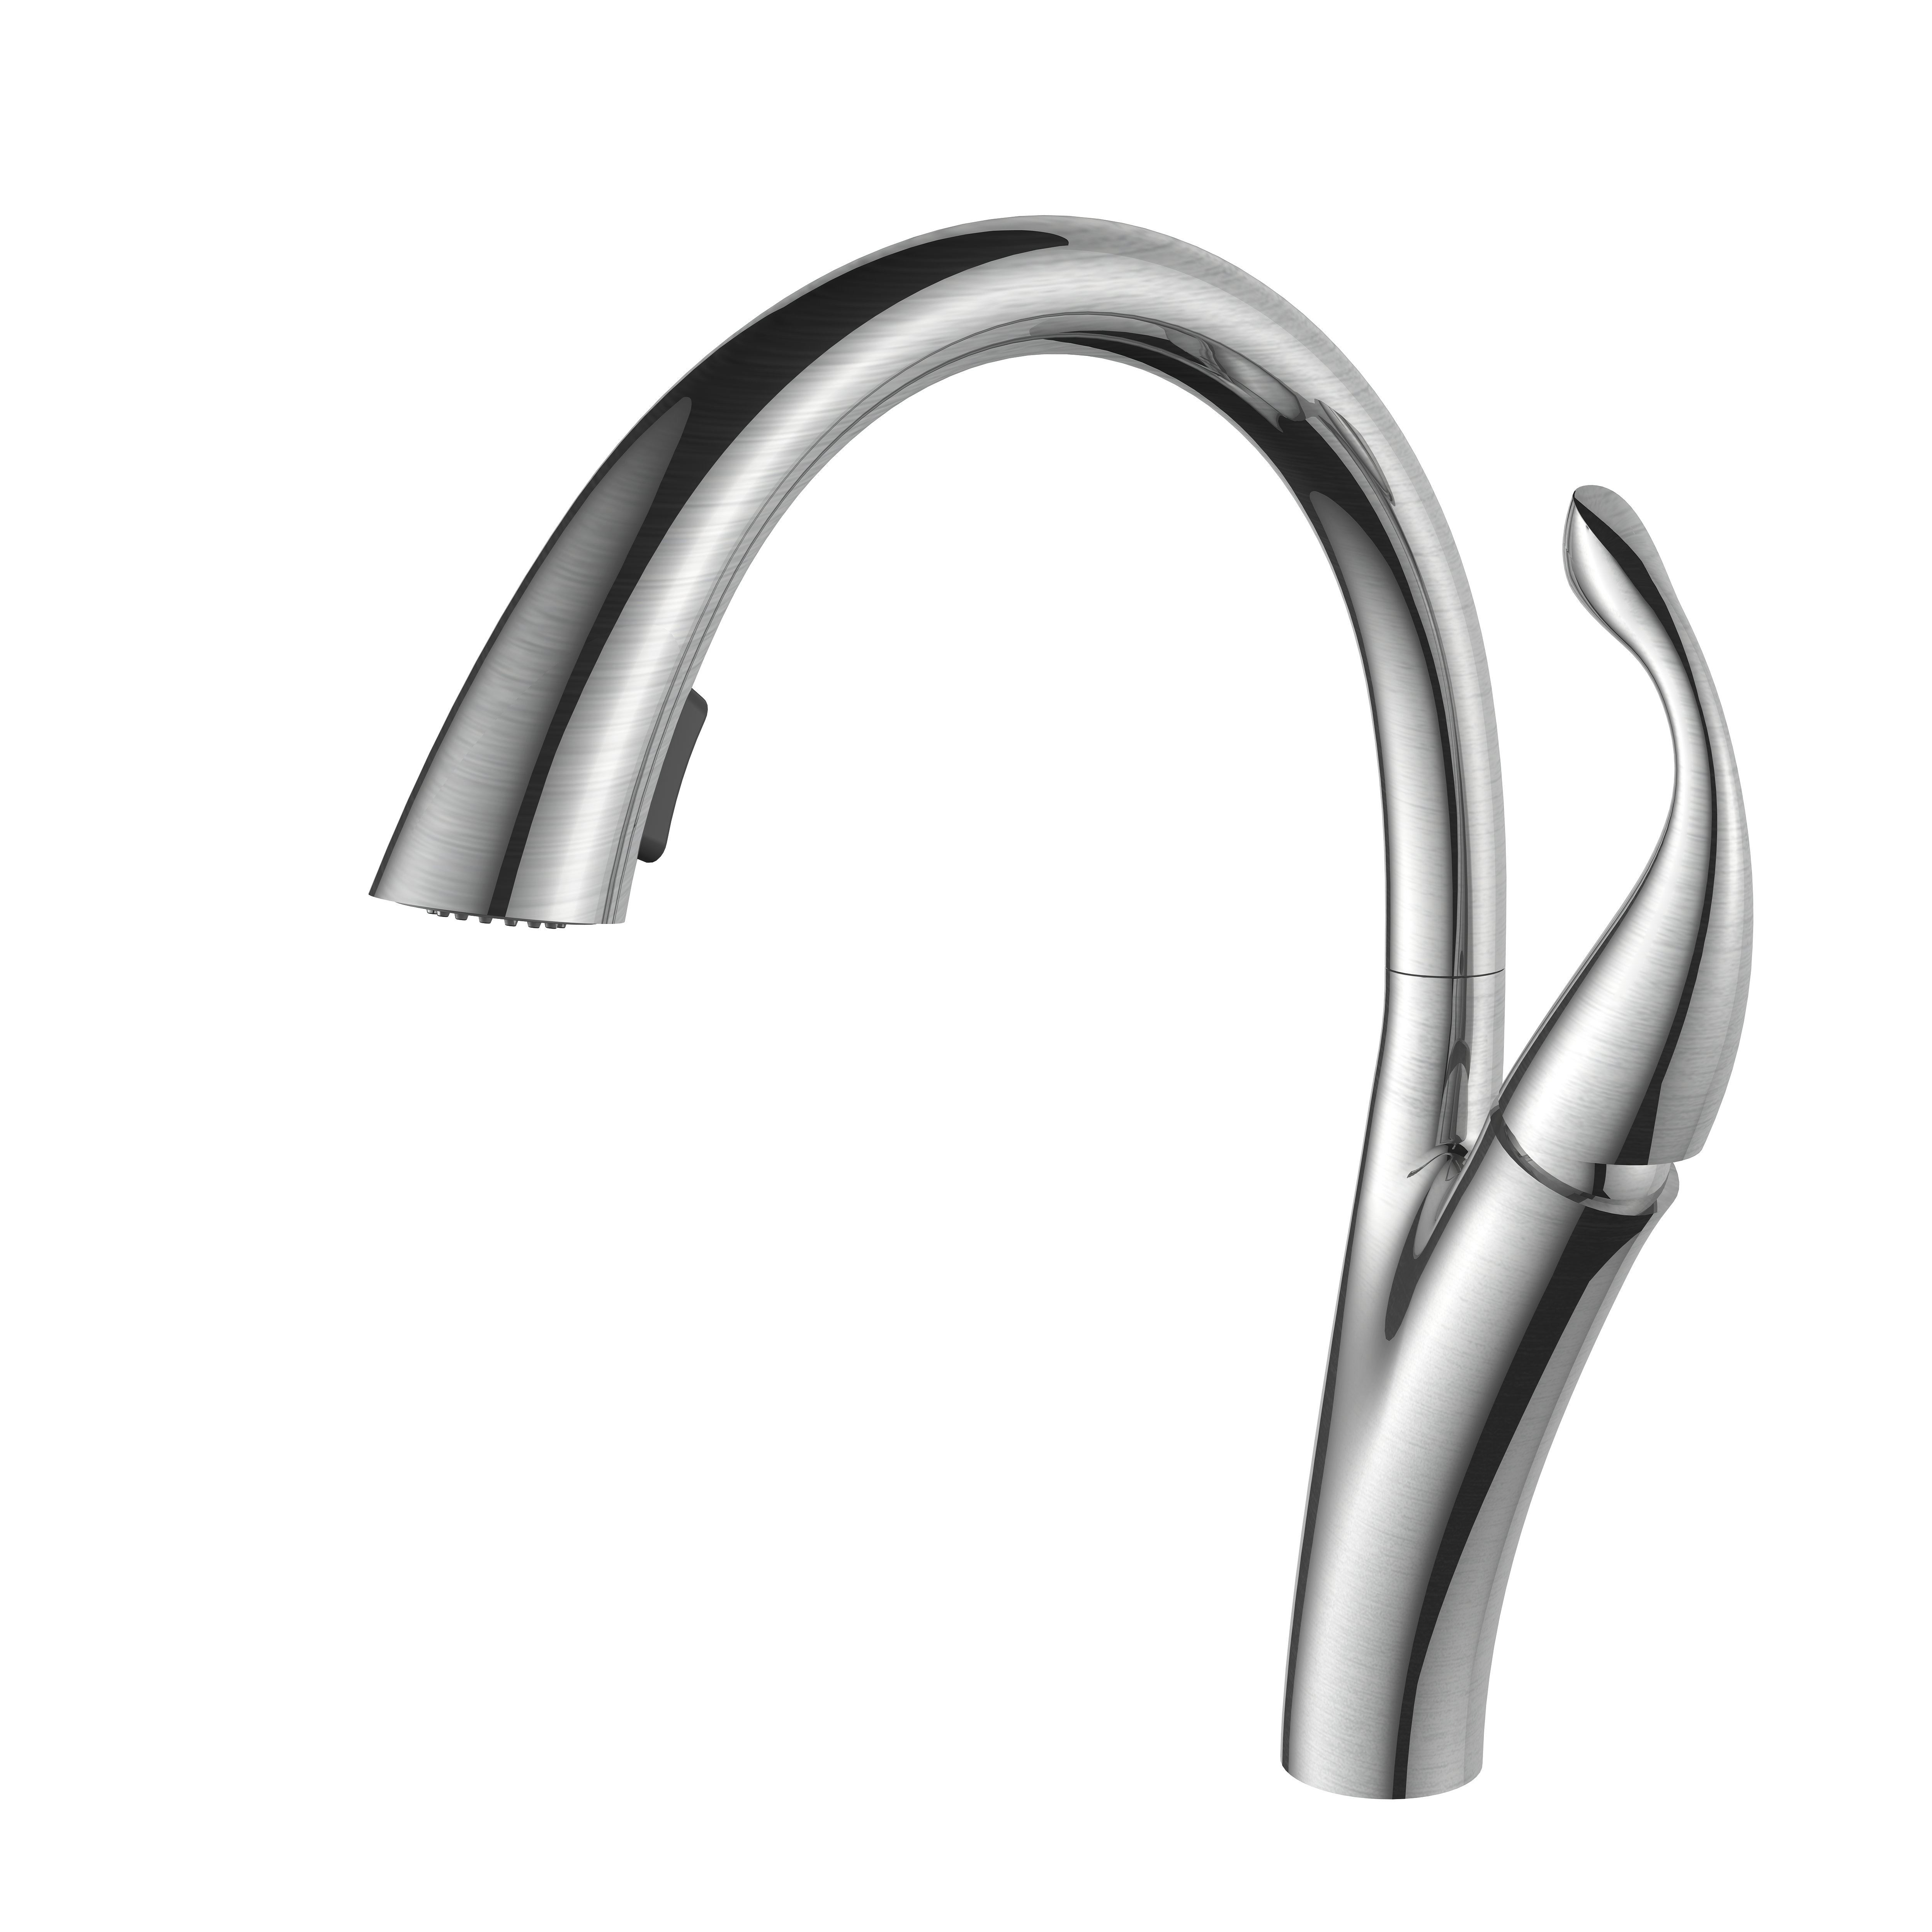 Brushed Nickel Kitchen Faucet Pull Down